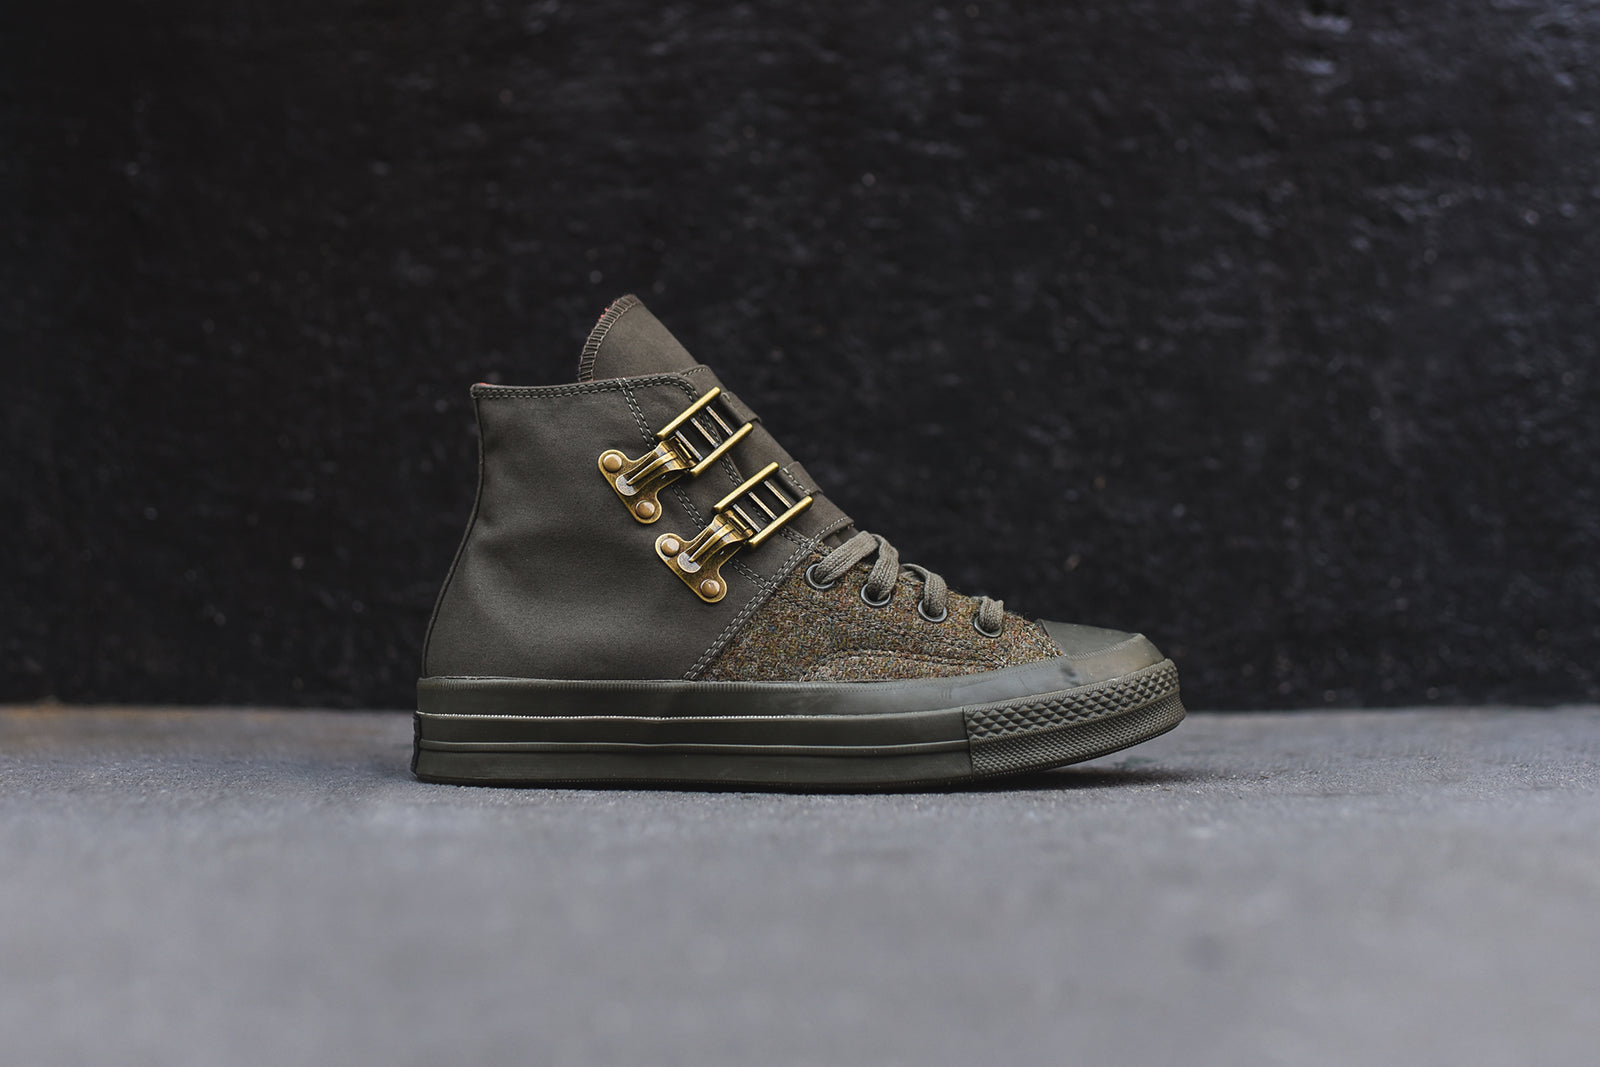 Converse x Nigel Cabourn Chuck Taylor All Star High Pack – Kith